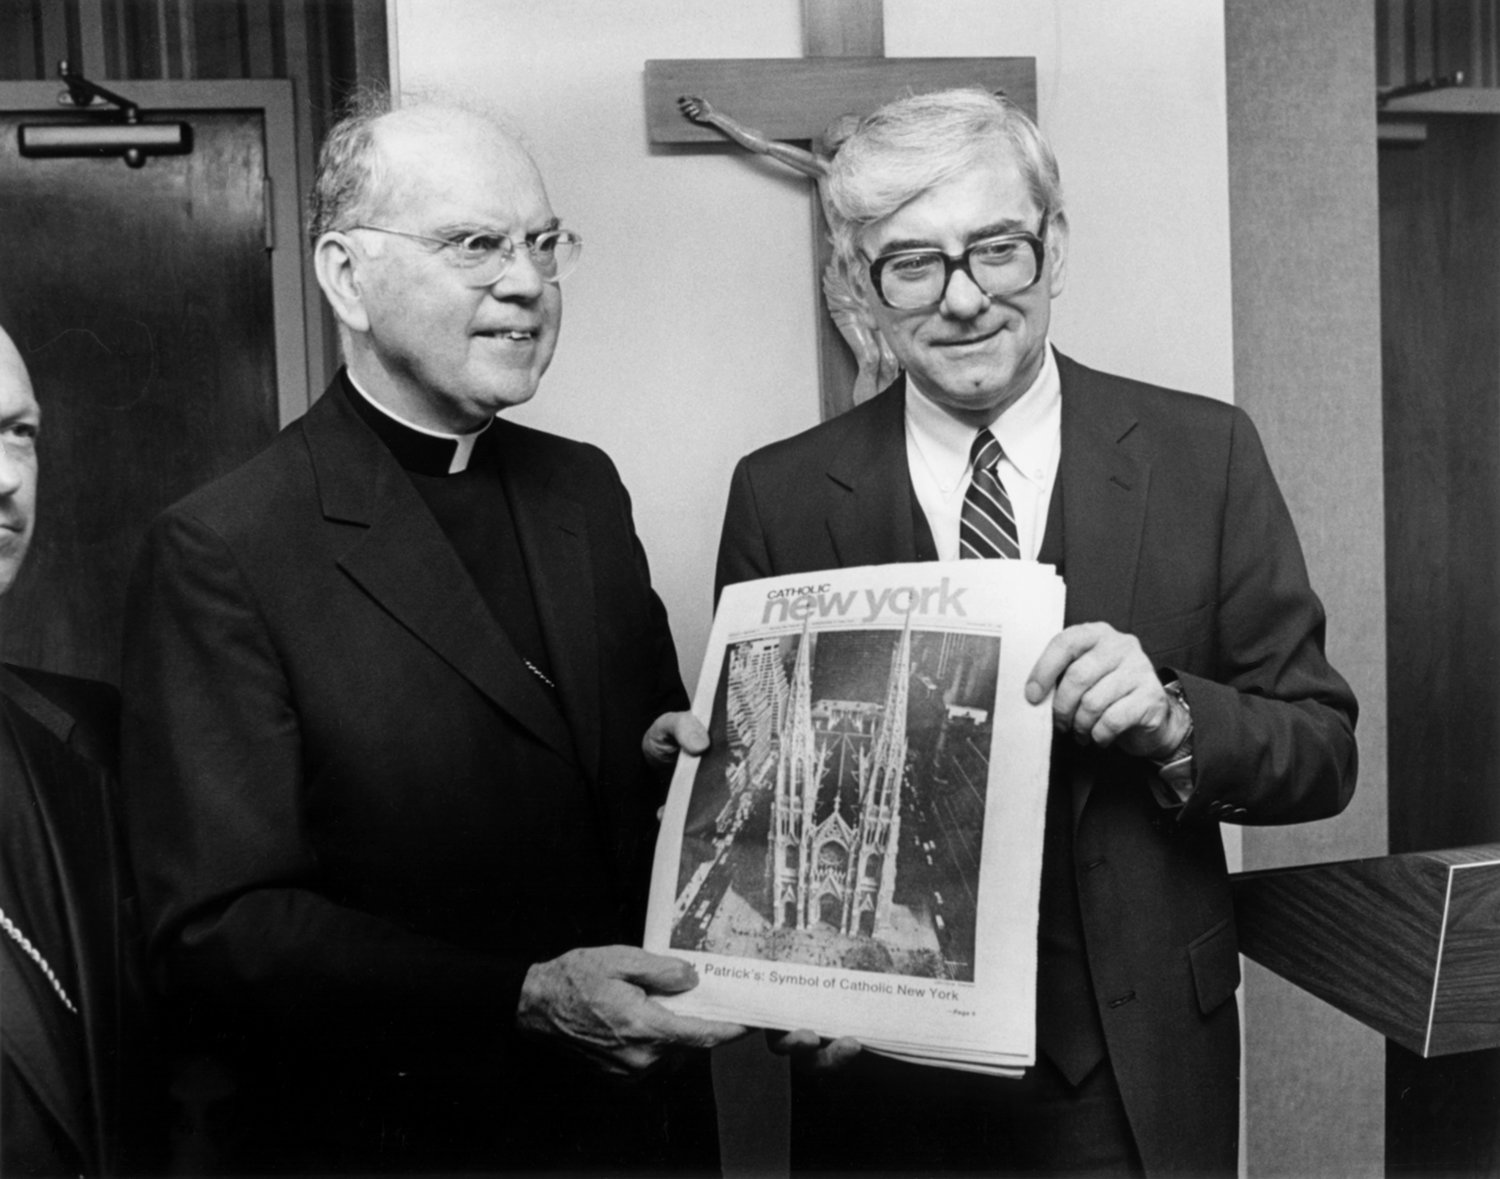 Cardinal Terence Cooke, then-archbishop of New York, and Gerald M. Costello, the founding editor in chief, proudly hold up a copy of the first issue of Catholic New York dated Sept. 27, 1981. The 88-page issue featured a copy of St. Patrick’s Cathedral on its cover and extensive local coverage of the Archdiocese of New York in its pages, a harbinger of what was to come in the ensuing decades. Costello, who died July 19, was CNY’s editor in chief from 1981 to 1991.